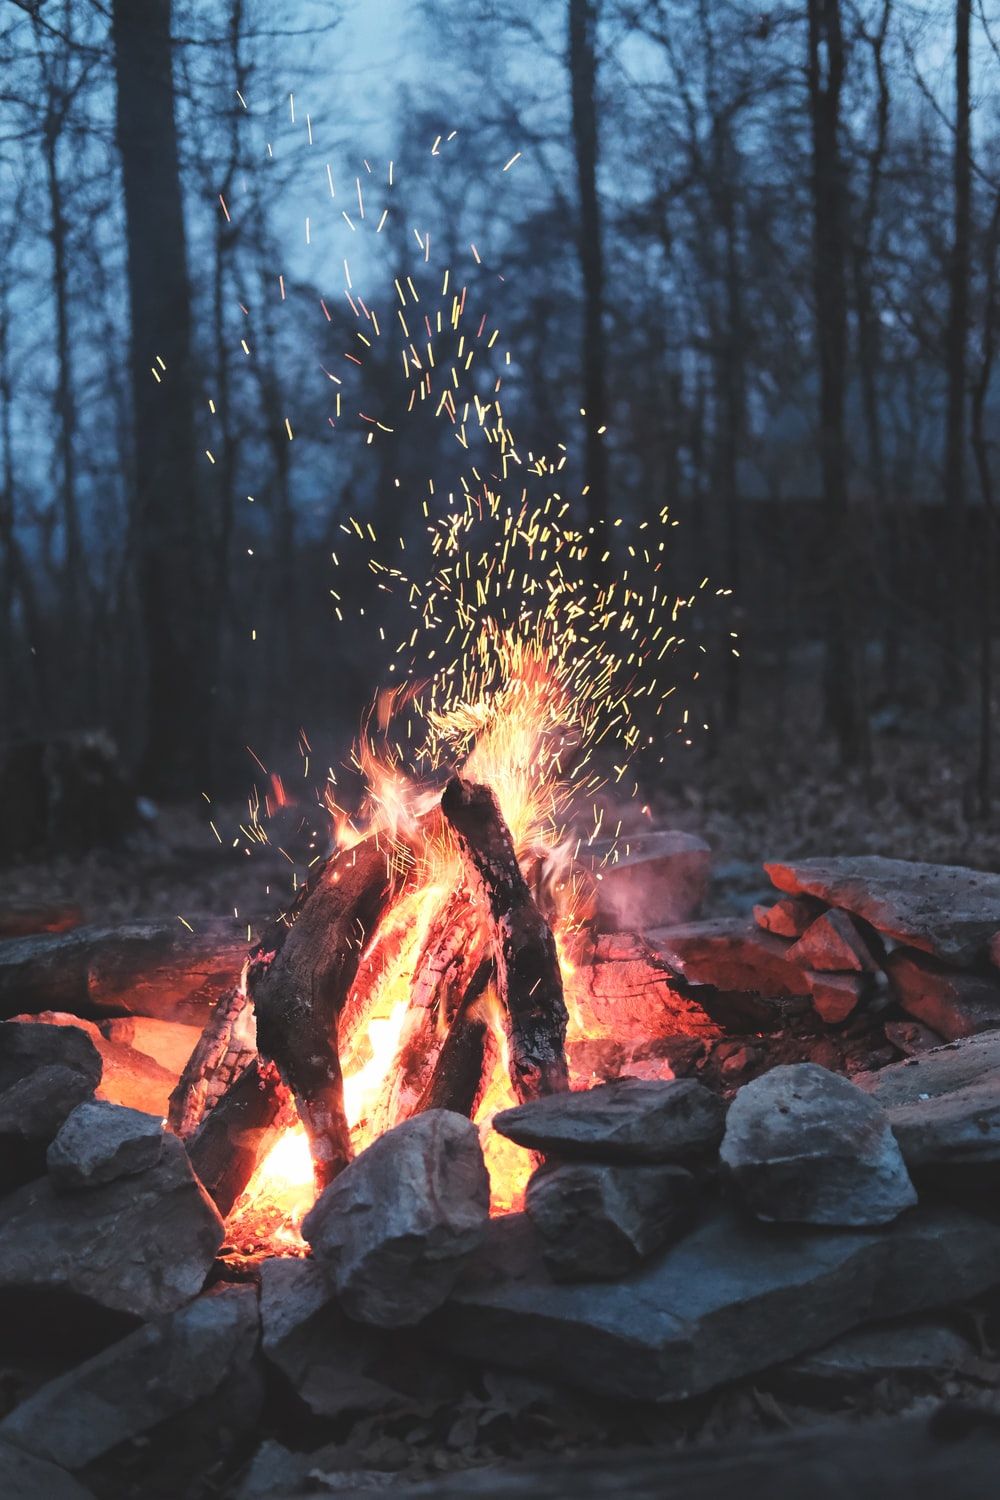 A campfire in the woods with sparks flying - Camping